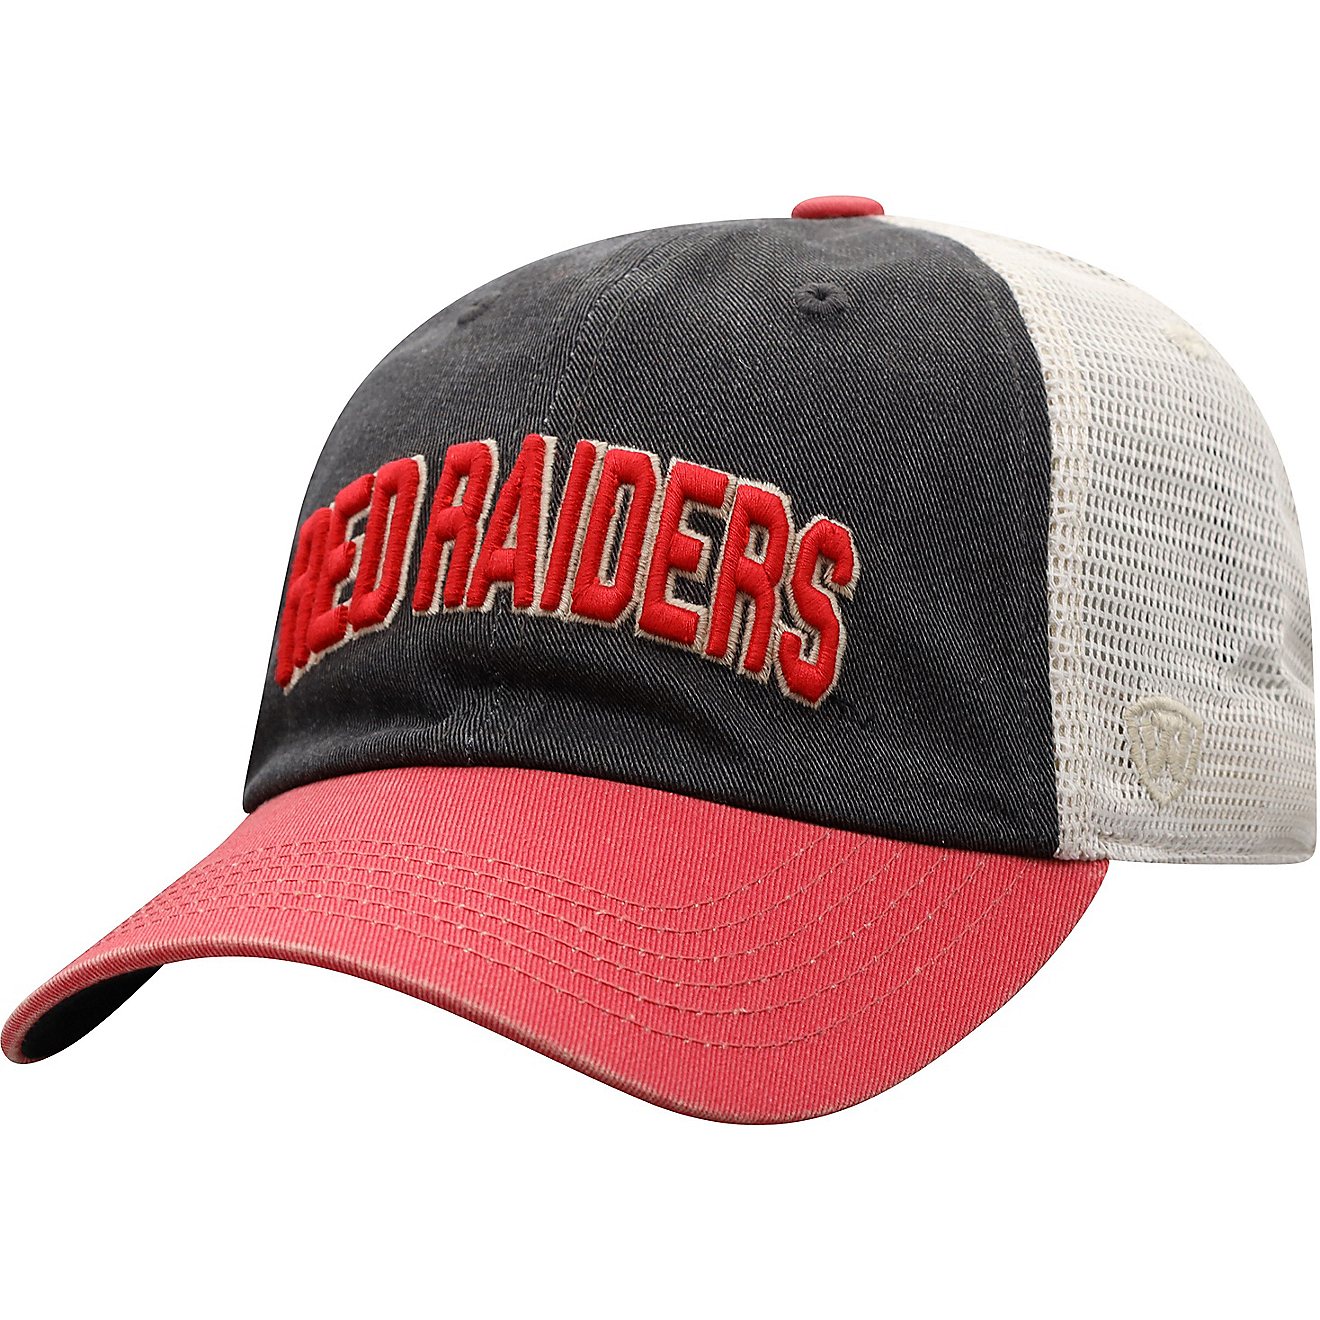 Top of the World Men's Texas Tech University Andy 3-Tone Cap                                                                     - view number 3